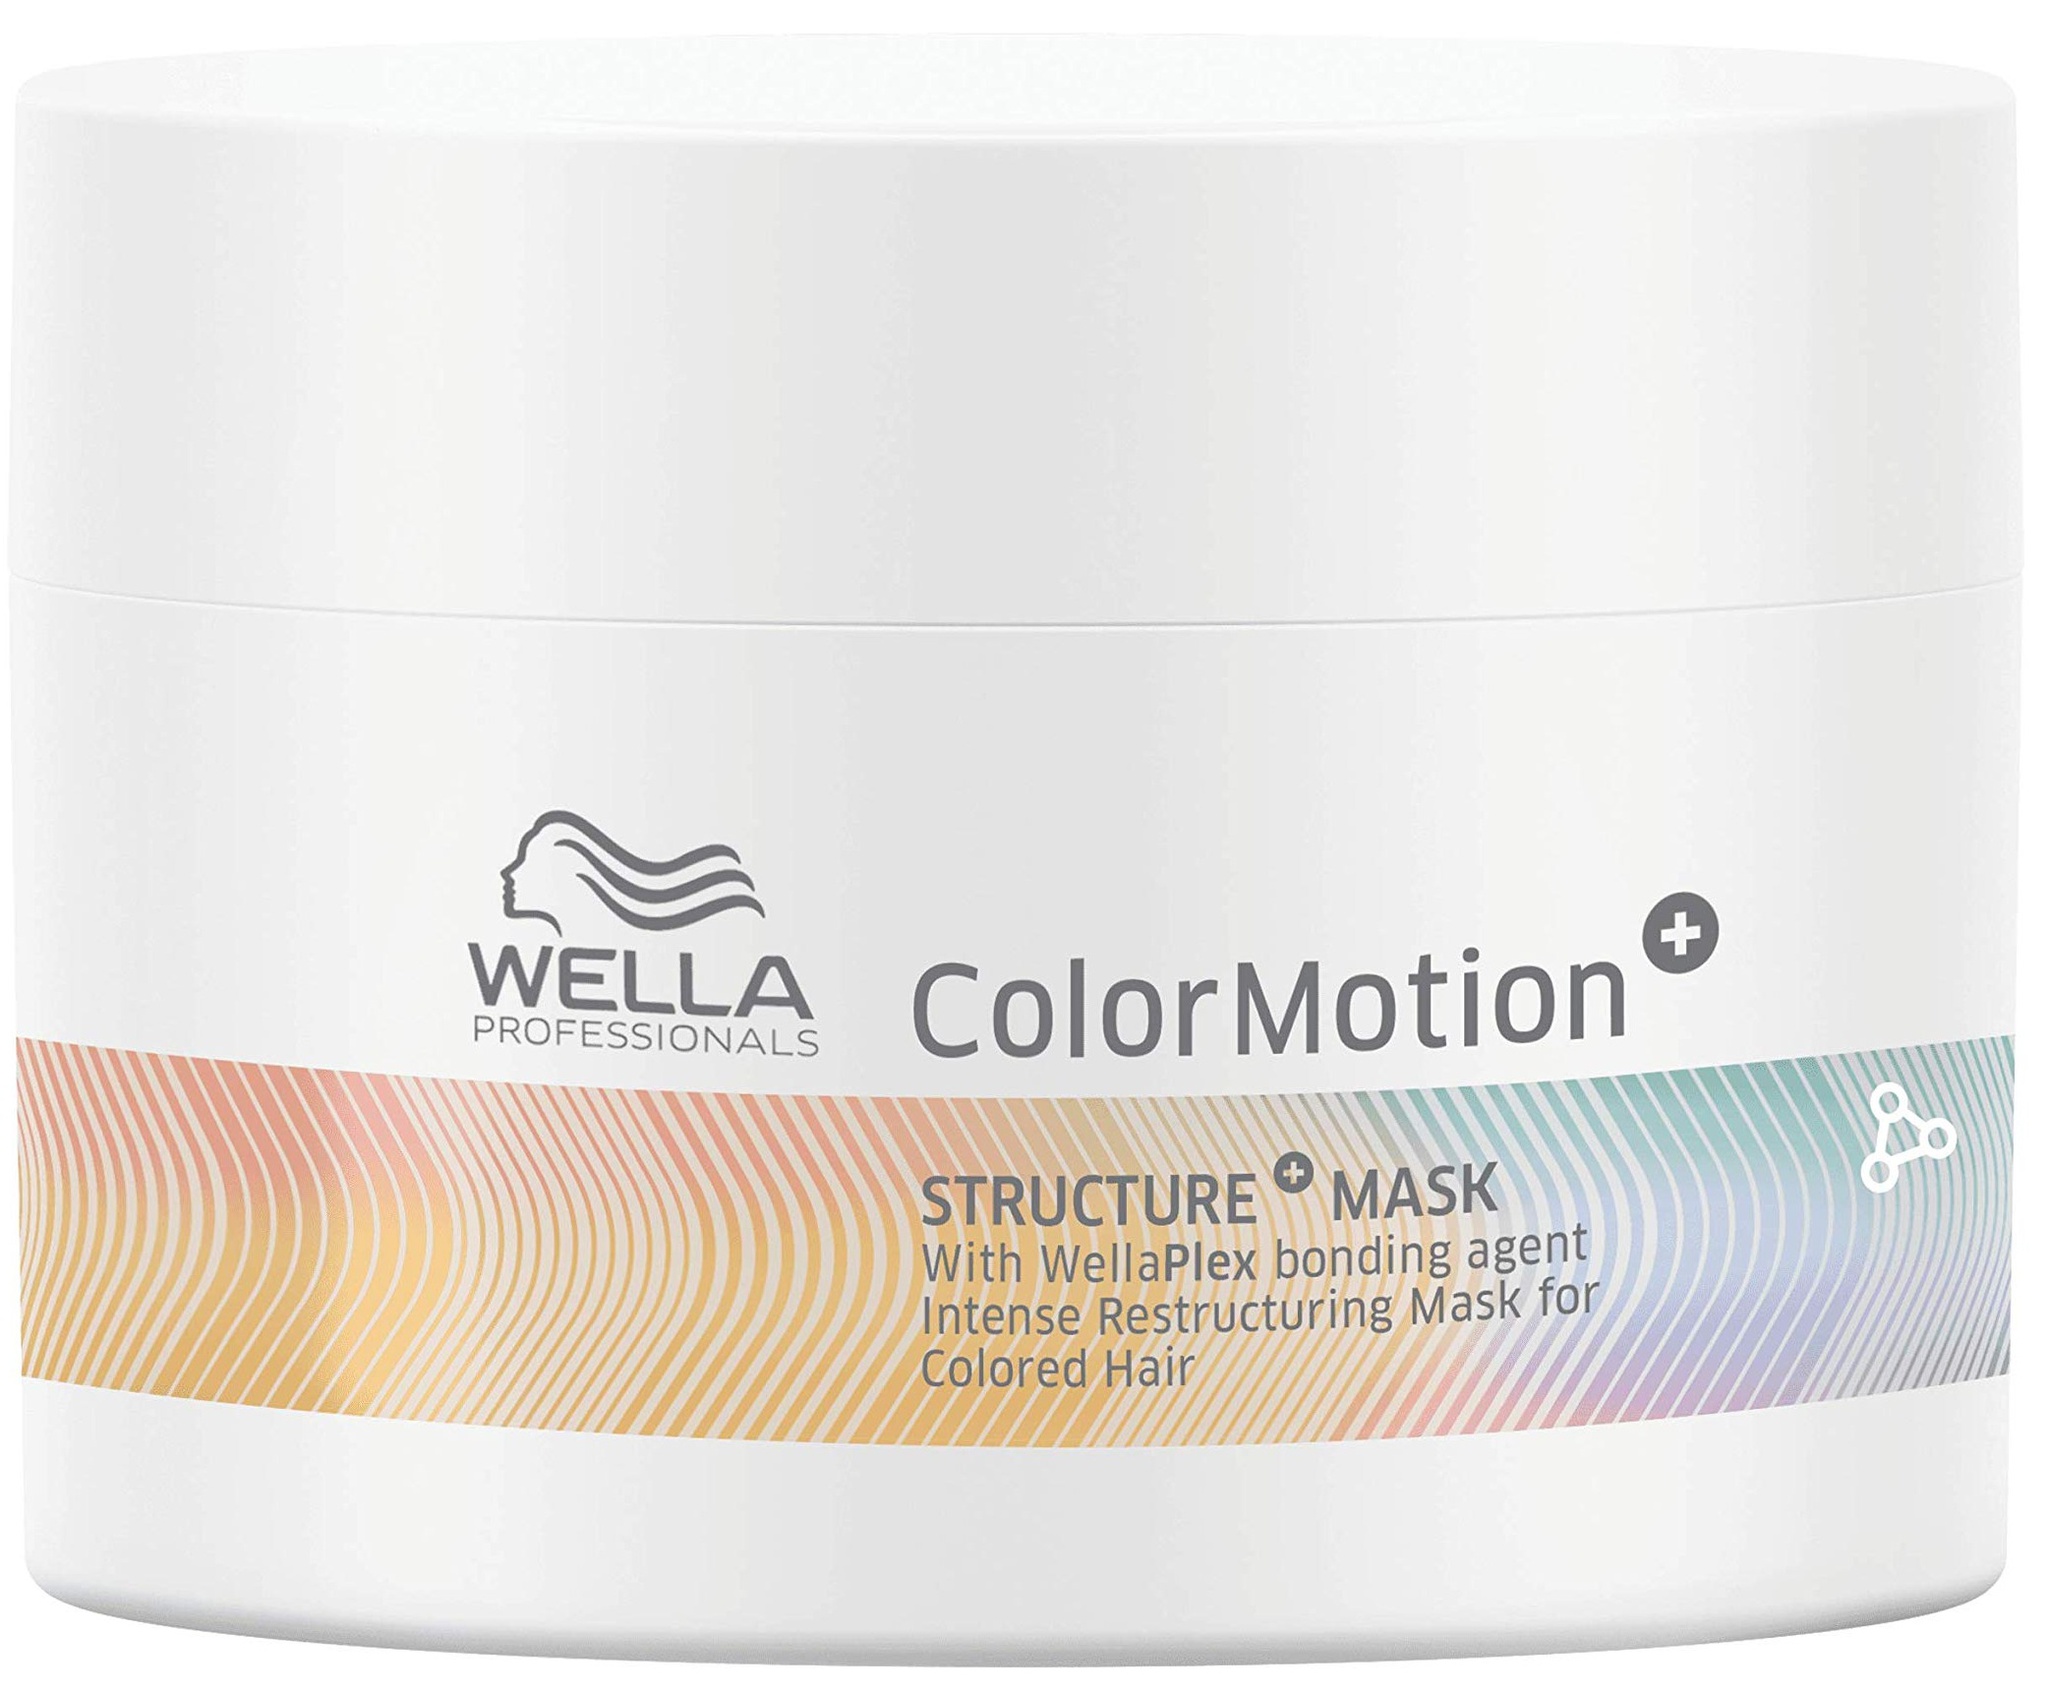 8. Wella Professionals Color Motion+ Color Protection Mask - wide 6